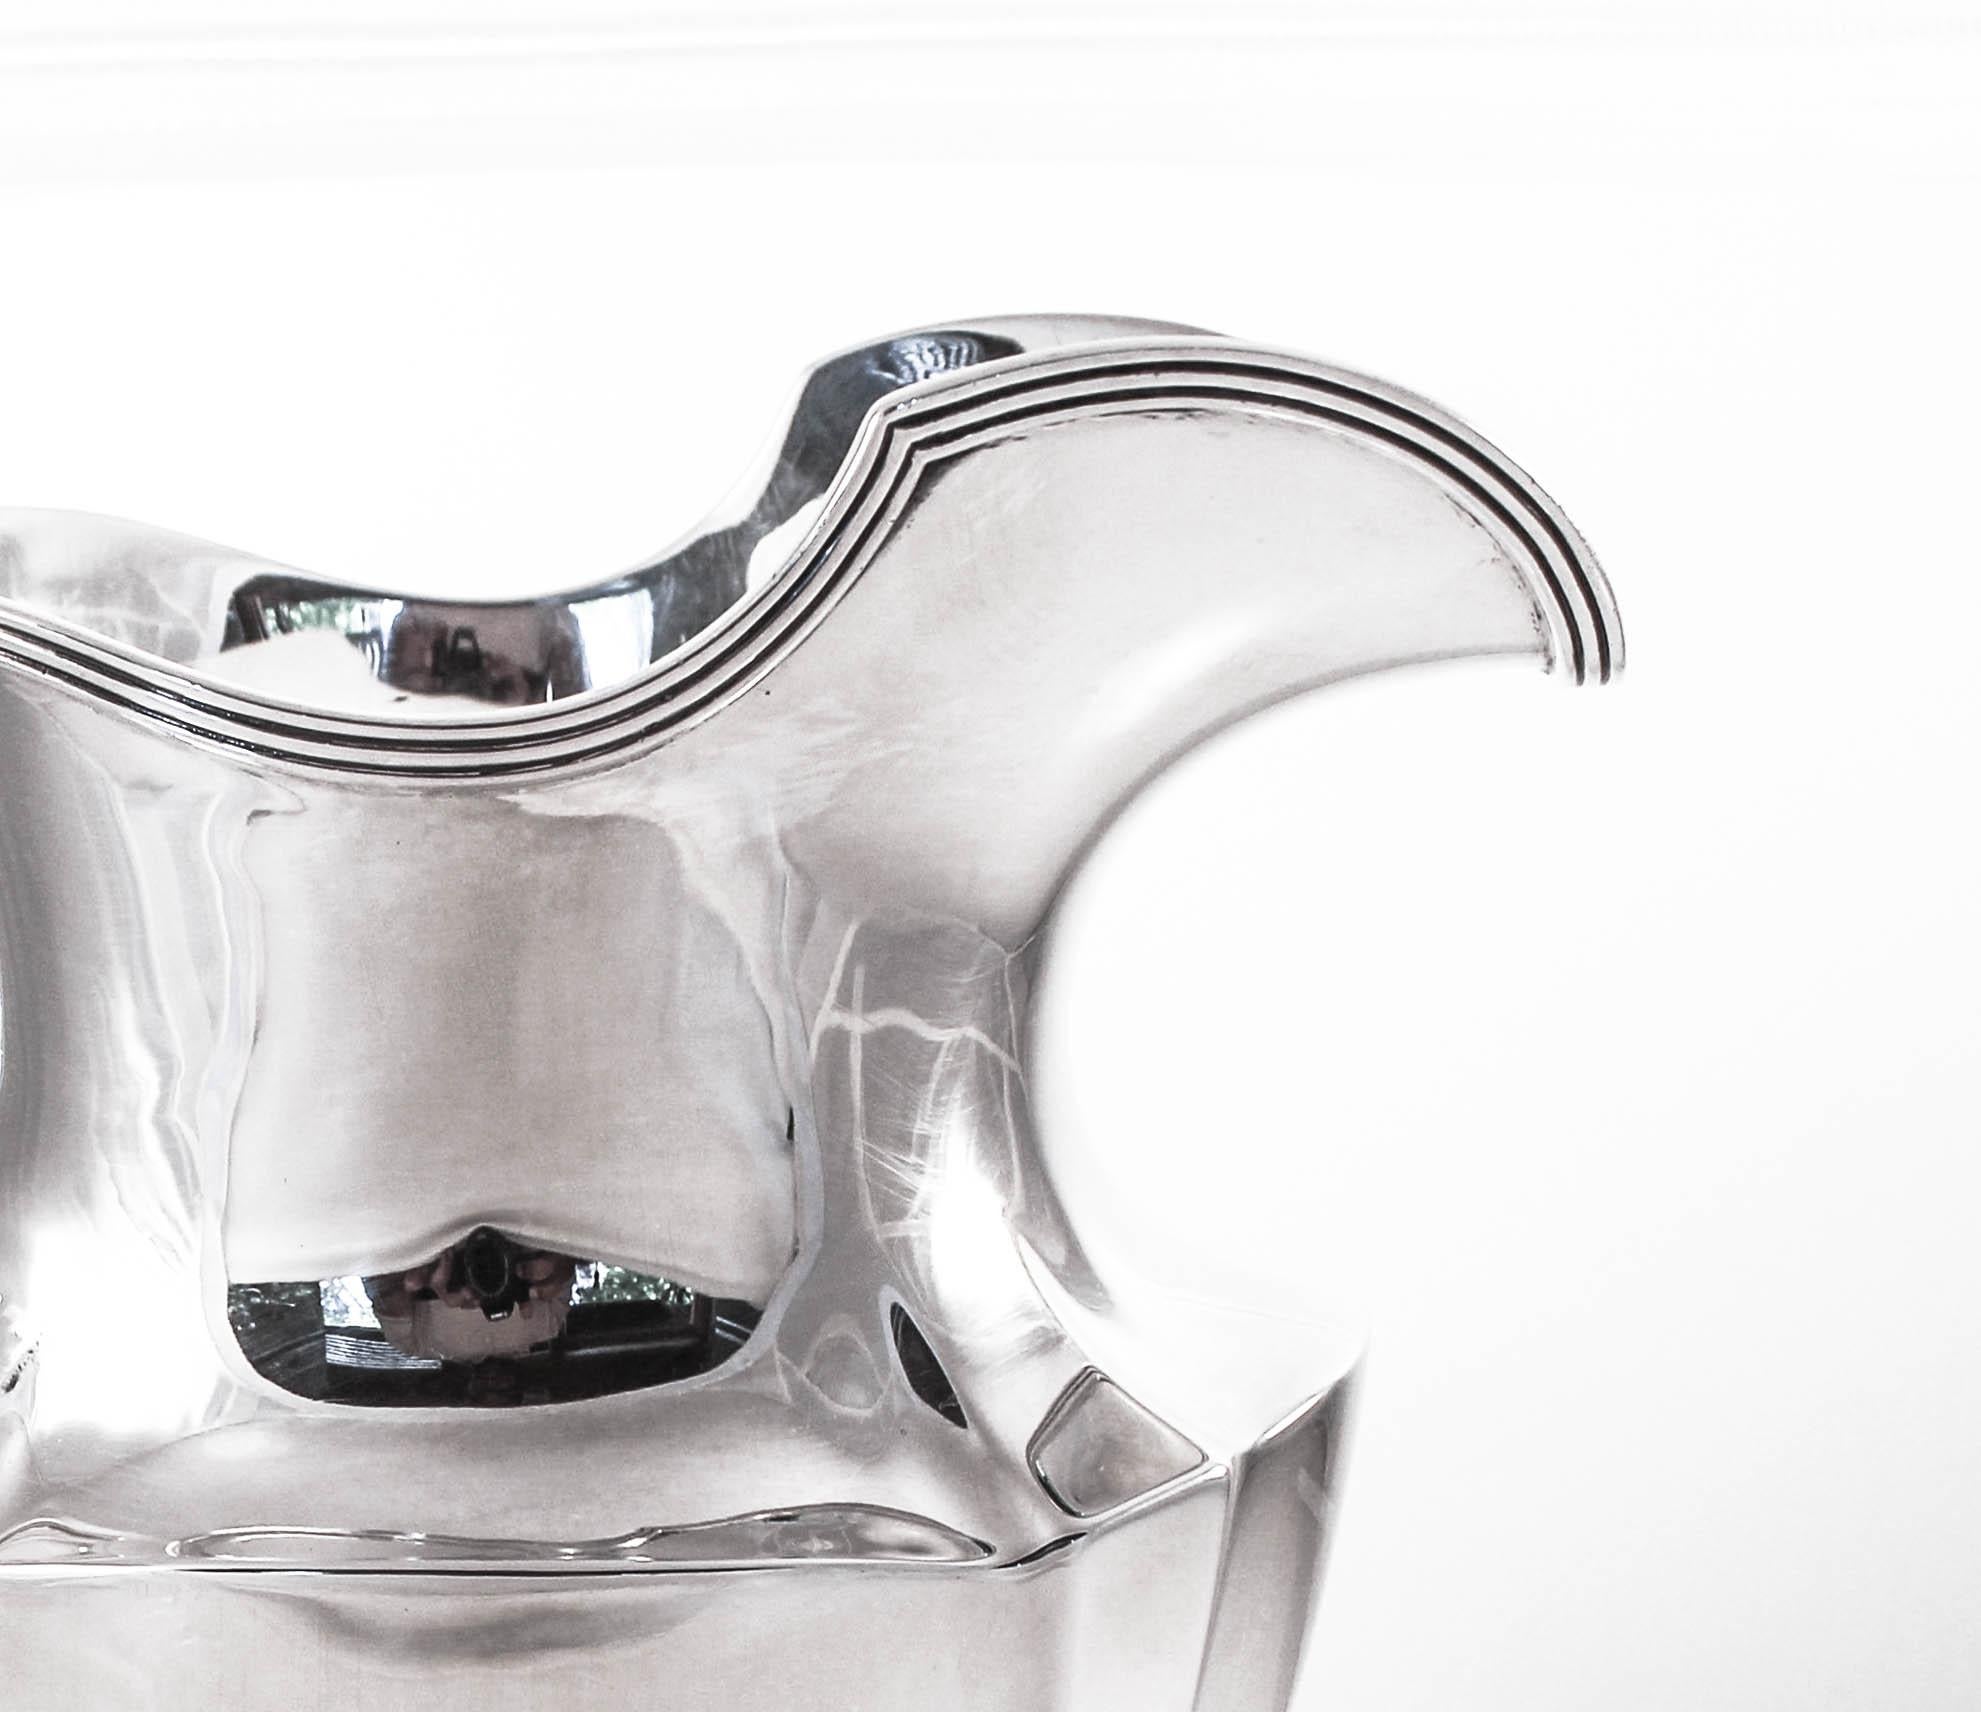 We are pleased to offer this sterling silver water pitcher from 1912 (signed) by the Gorham Silver Co., of Providence Rhode Island. At 108 years old this water pitcher has seen 18 American presidents, the Great Depression, the civil rights movement